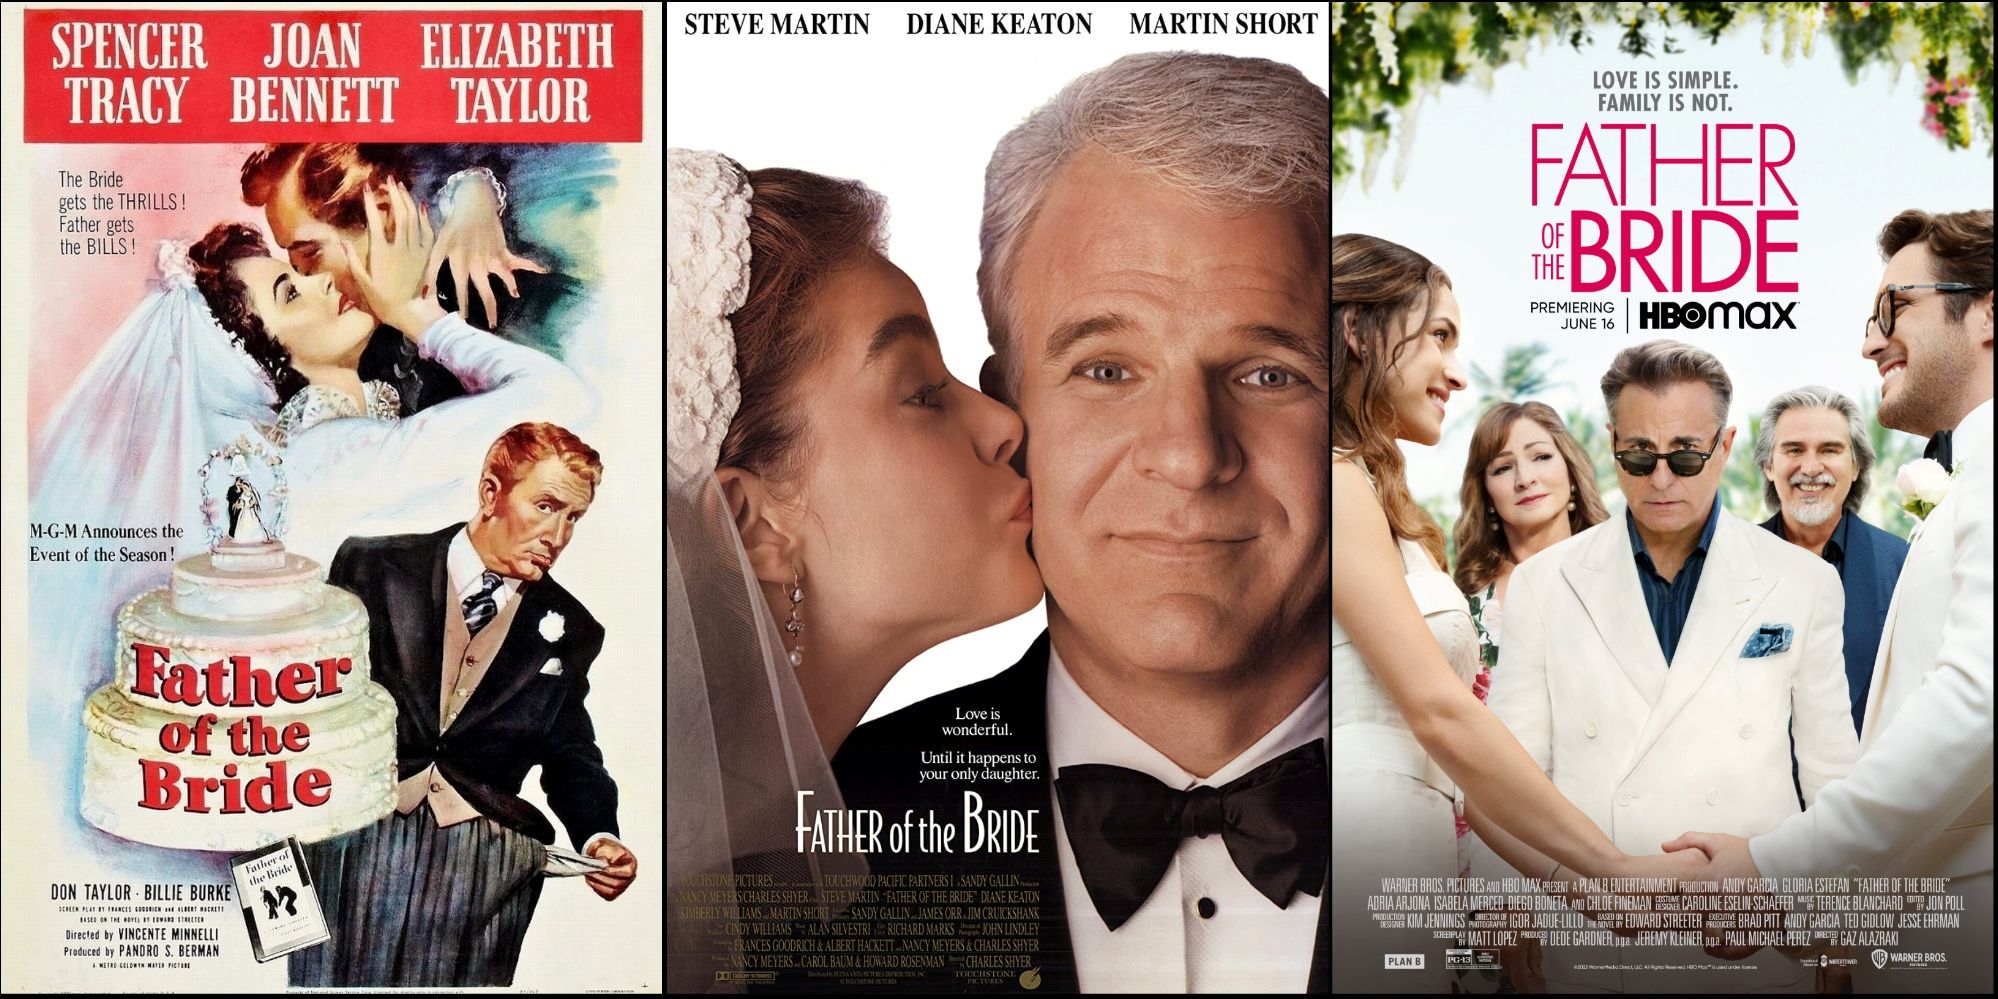 father of the bride remakes movie posters tracy spencer steve martin andy garcia